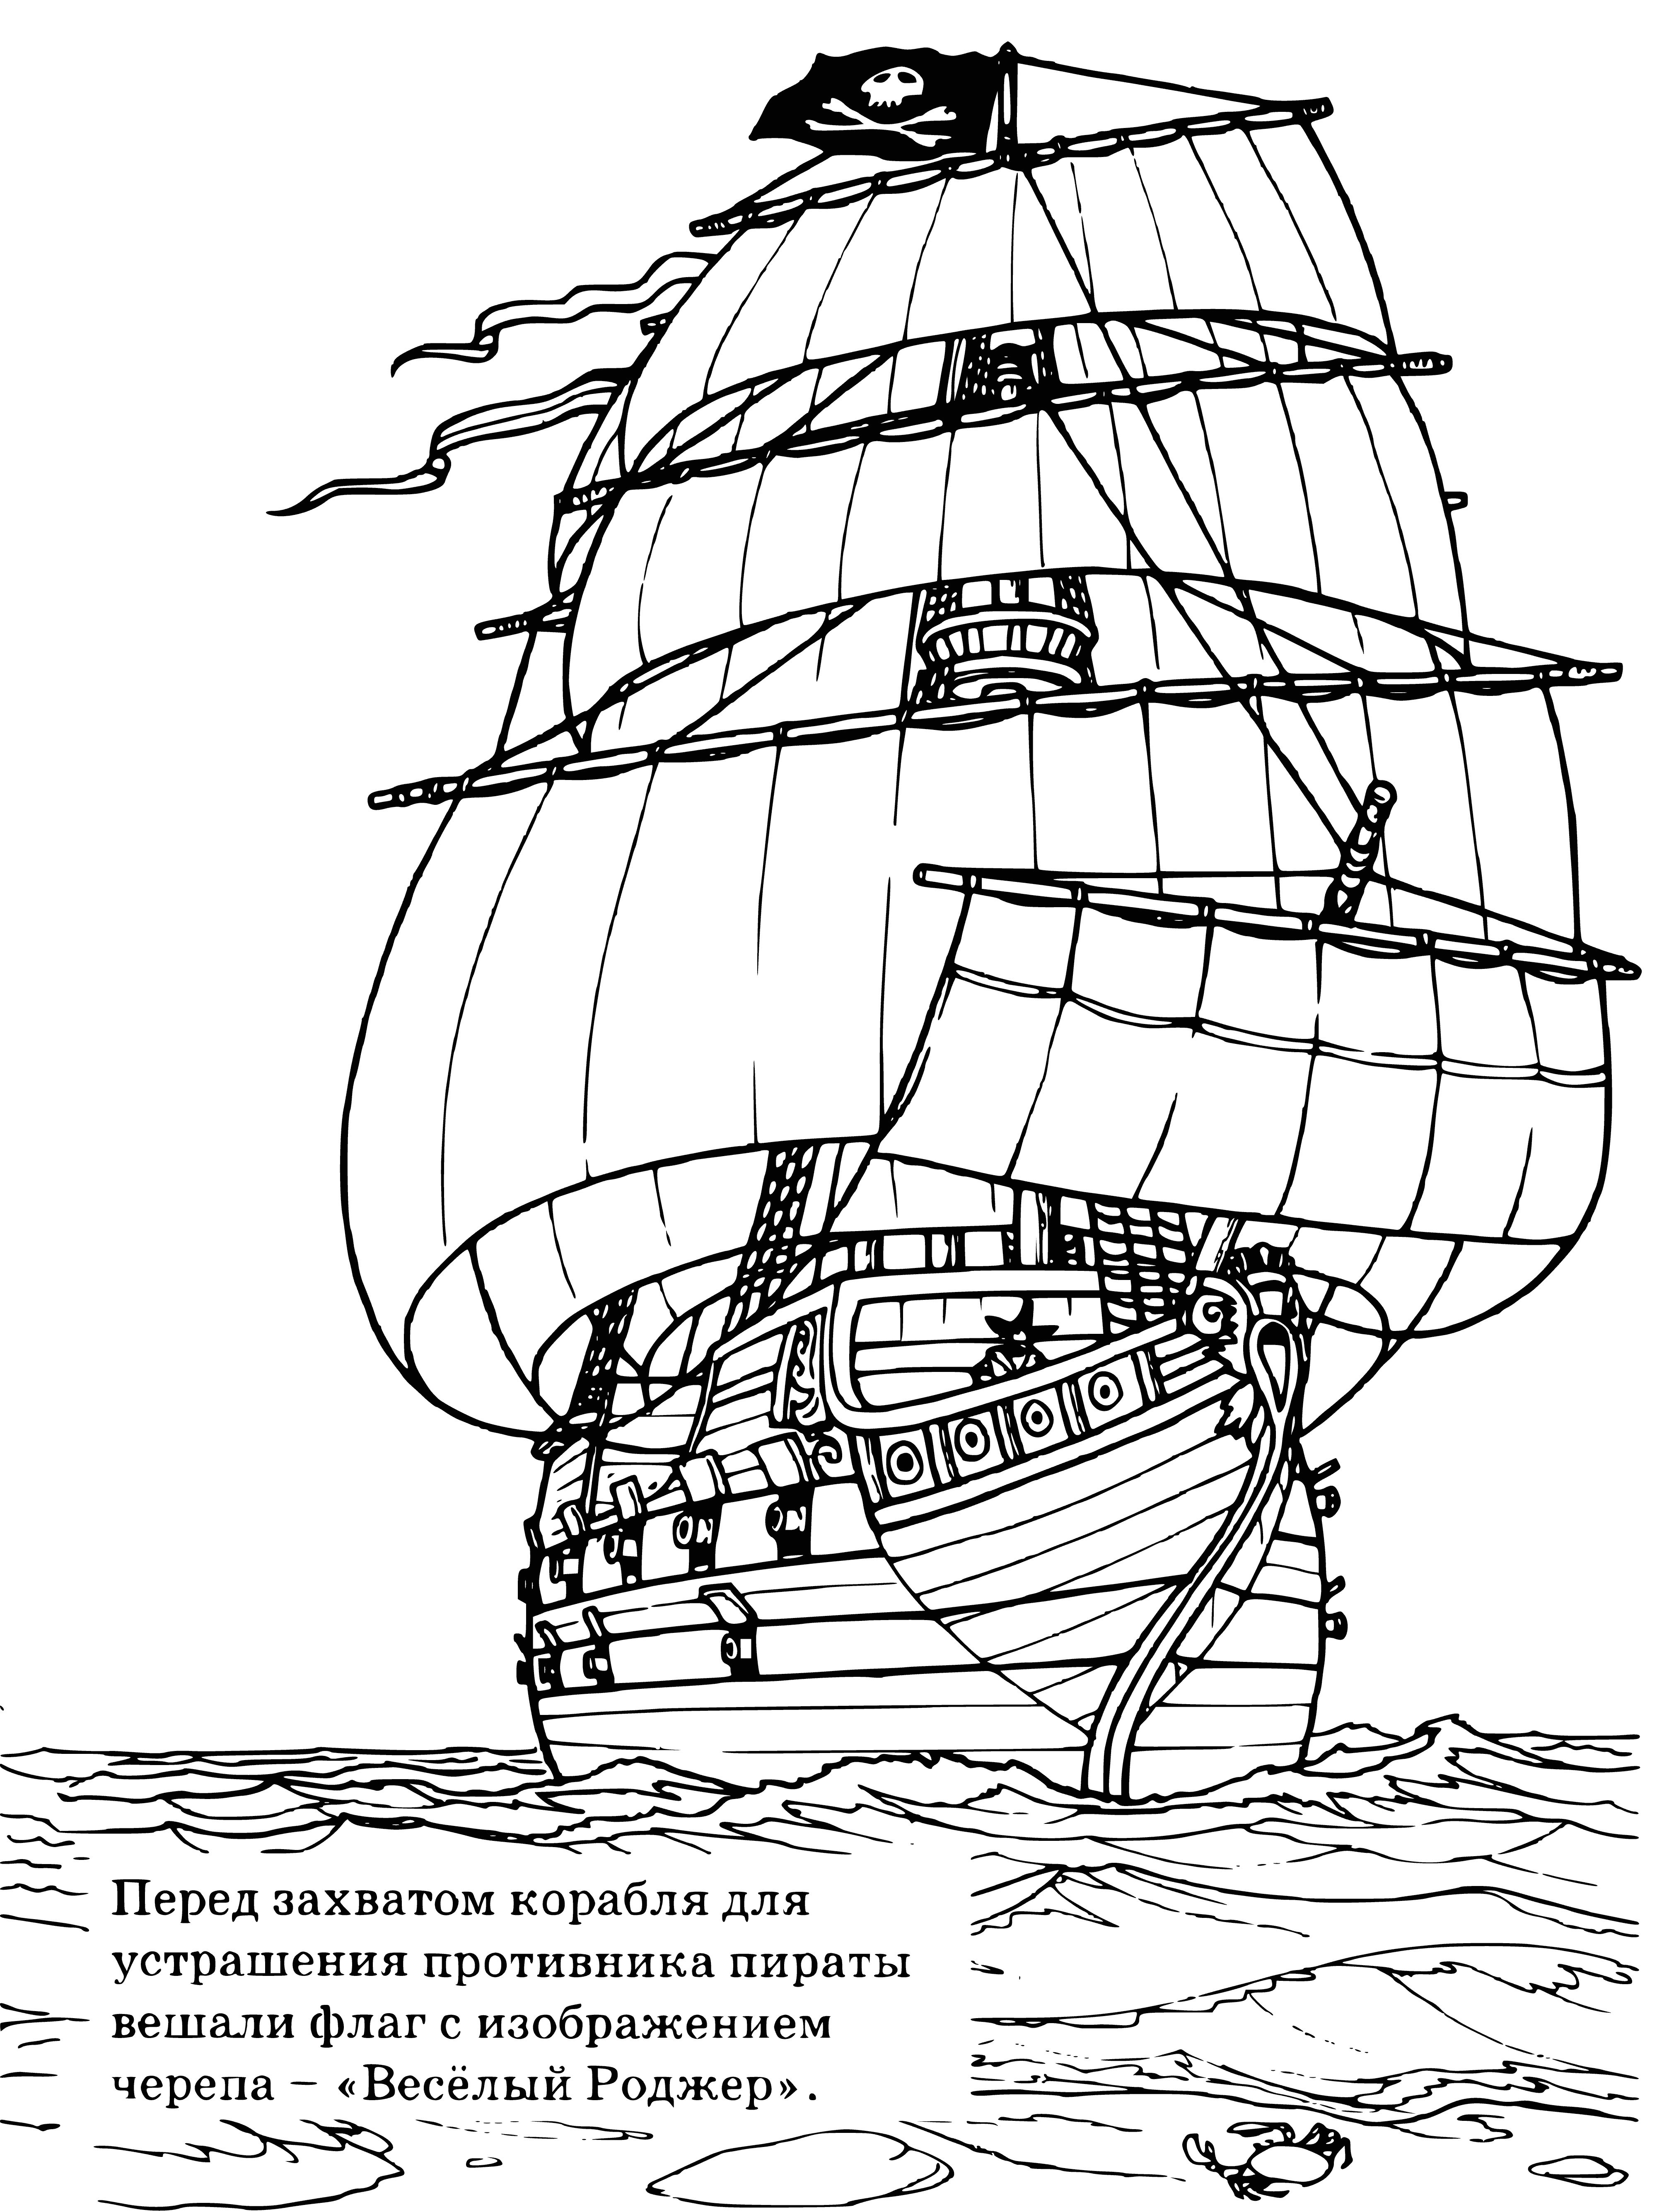 coloring page: Pirates sail on an old, rundown ship with a black flag & skull and crossbones. Mean & tough crew onboard. #Pirates #Fantasy